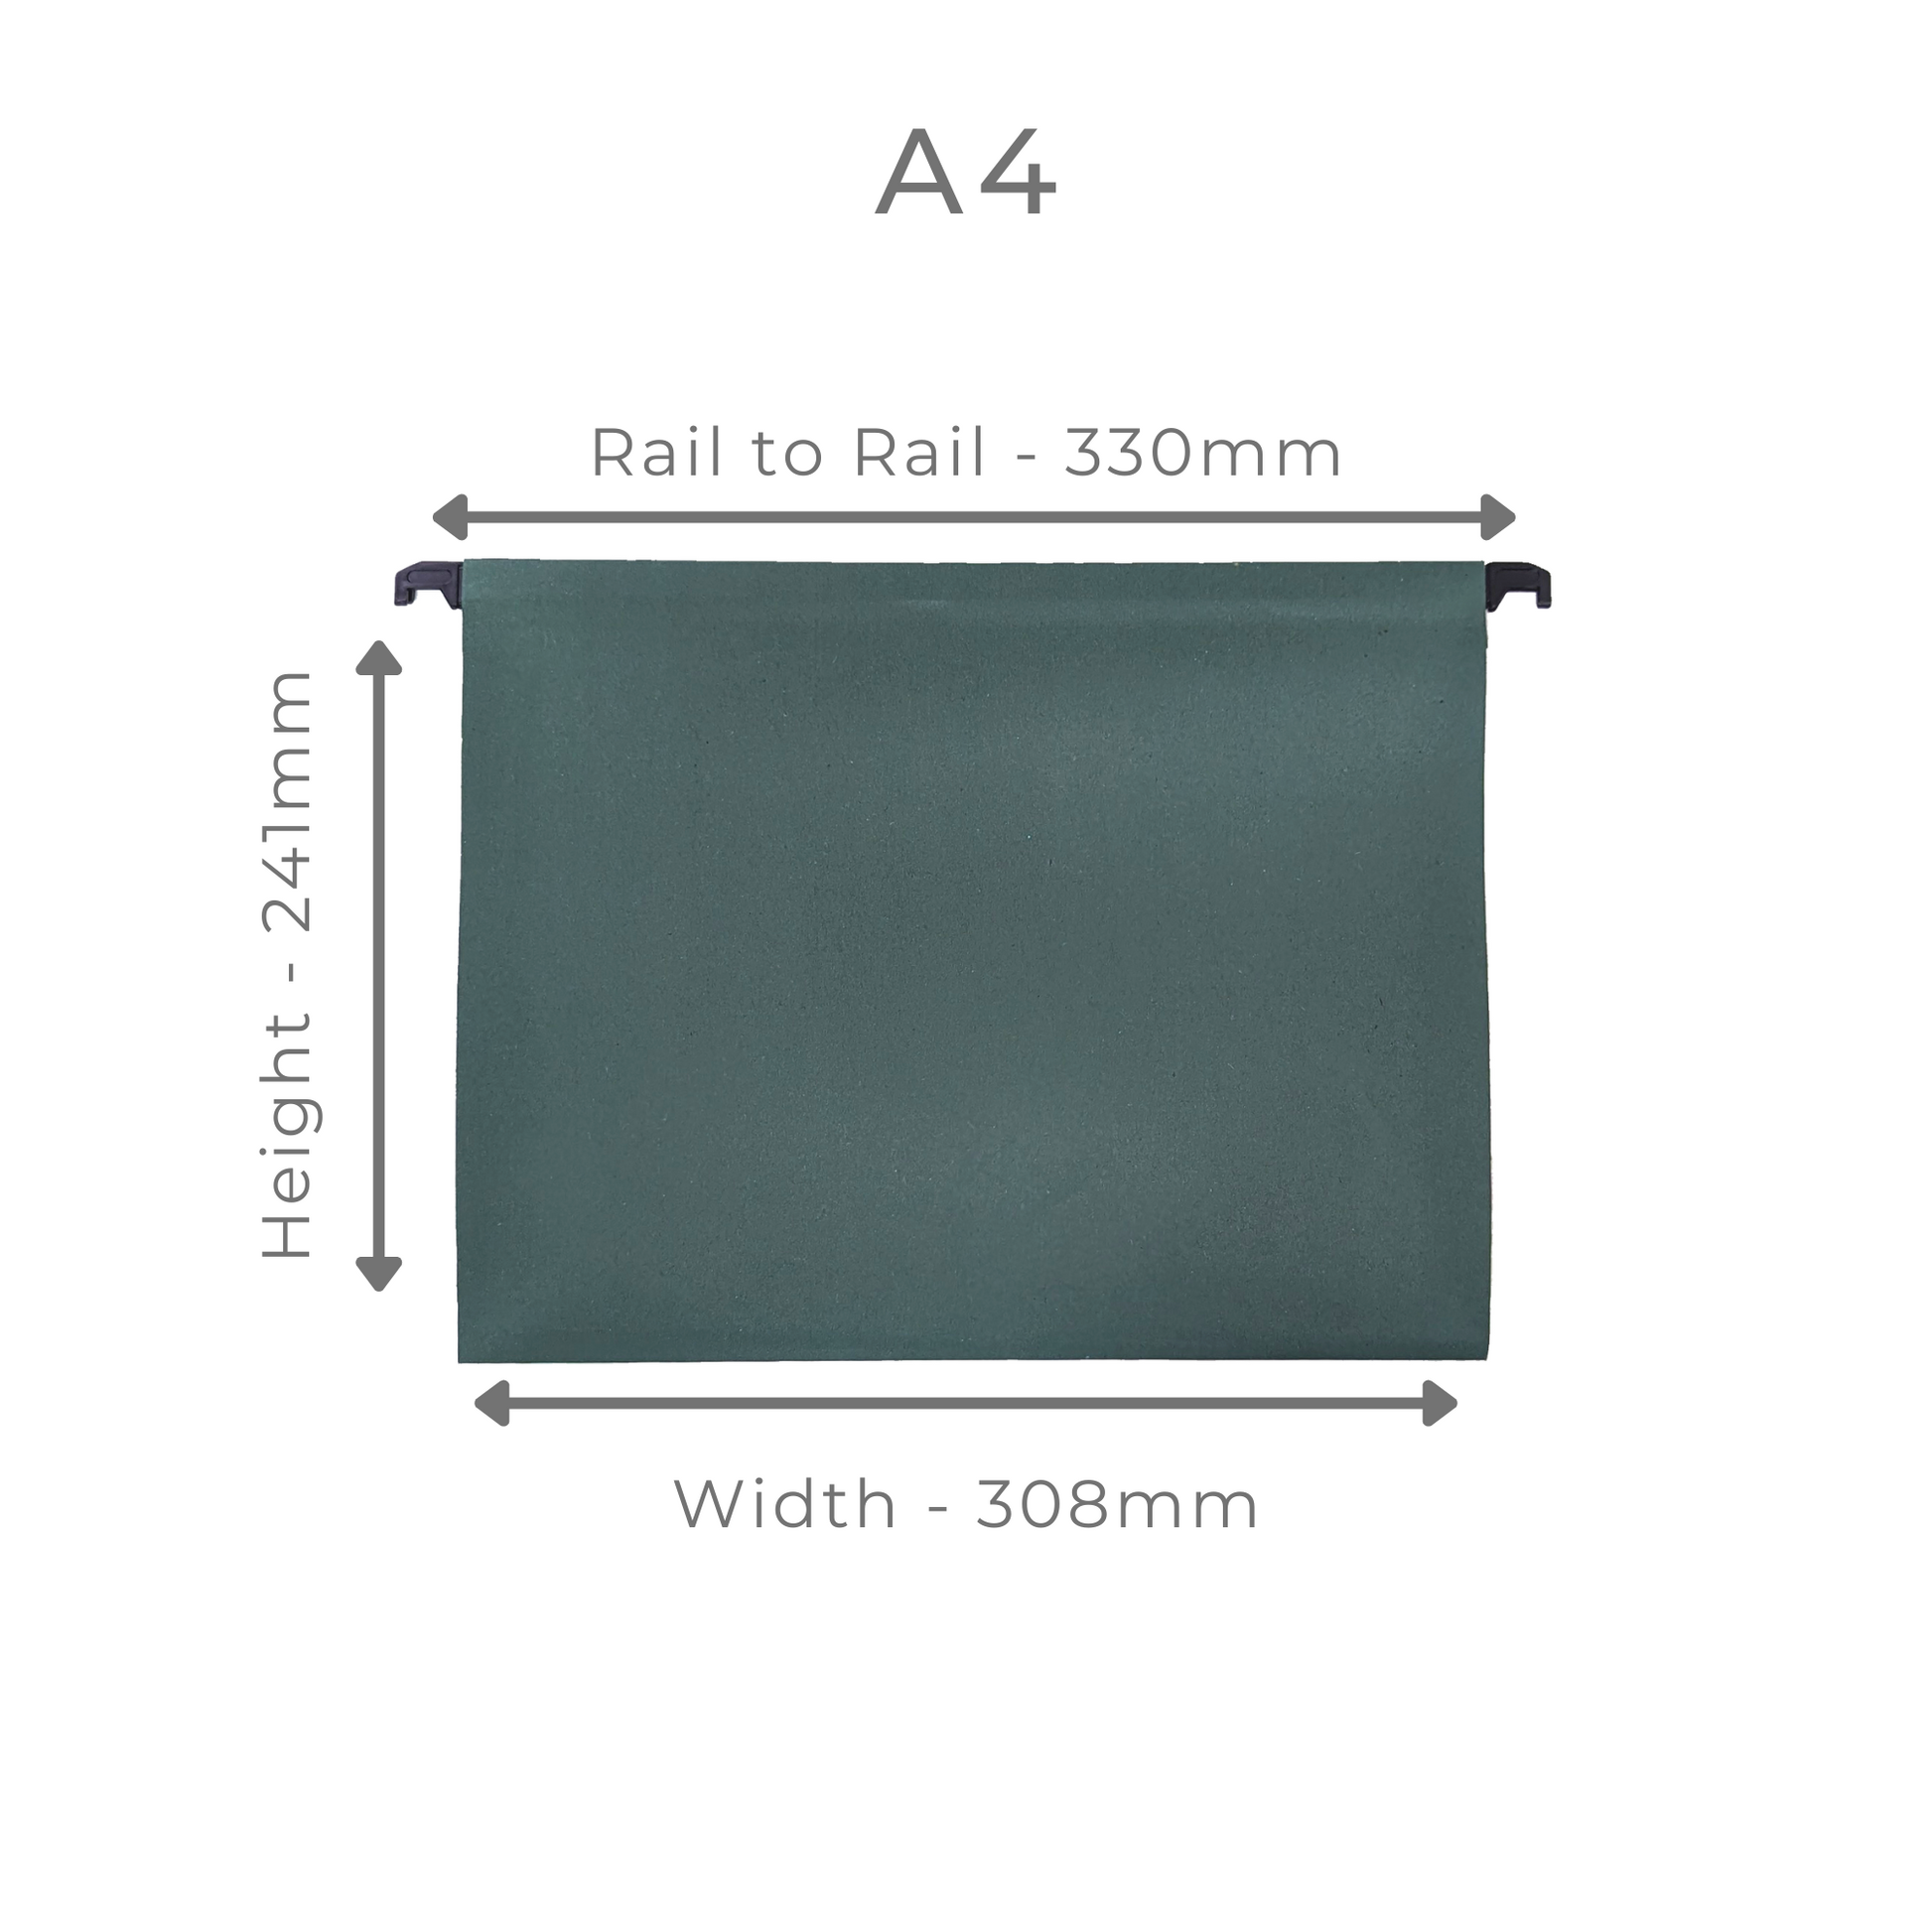 Dimensional diagram of an A4 green manilla suspension file, with measurements indicating a rail-to-rail length of 330mm, width of 308mm, and height of 241mm